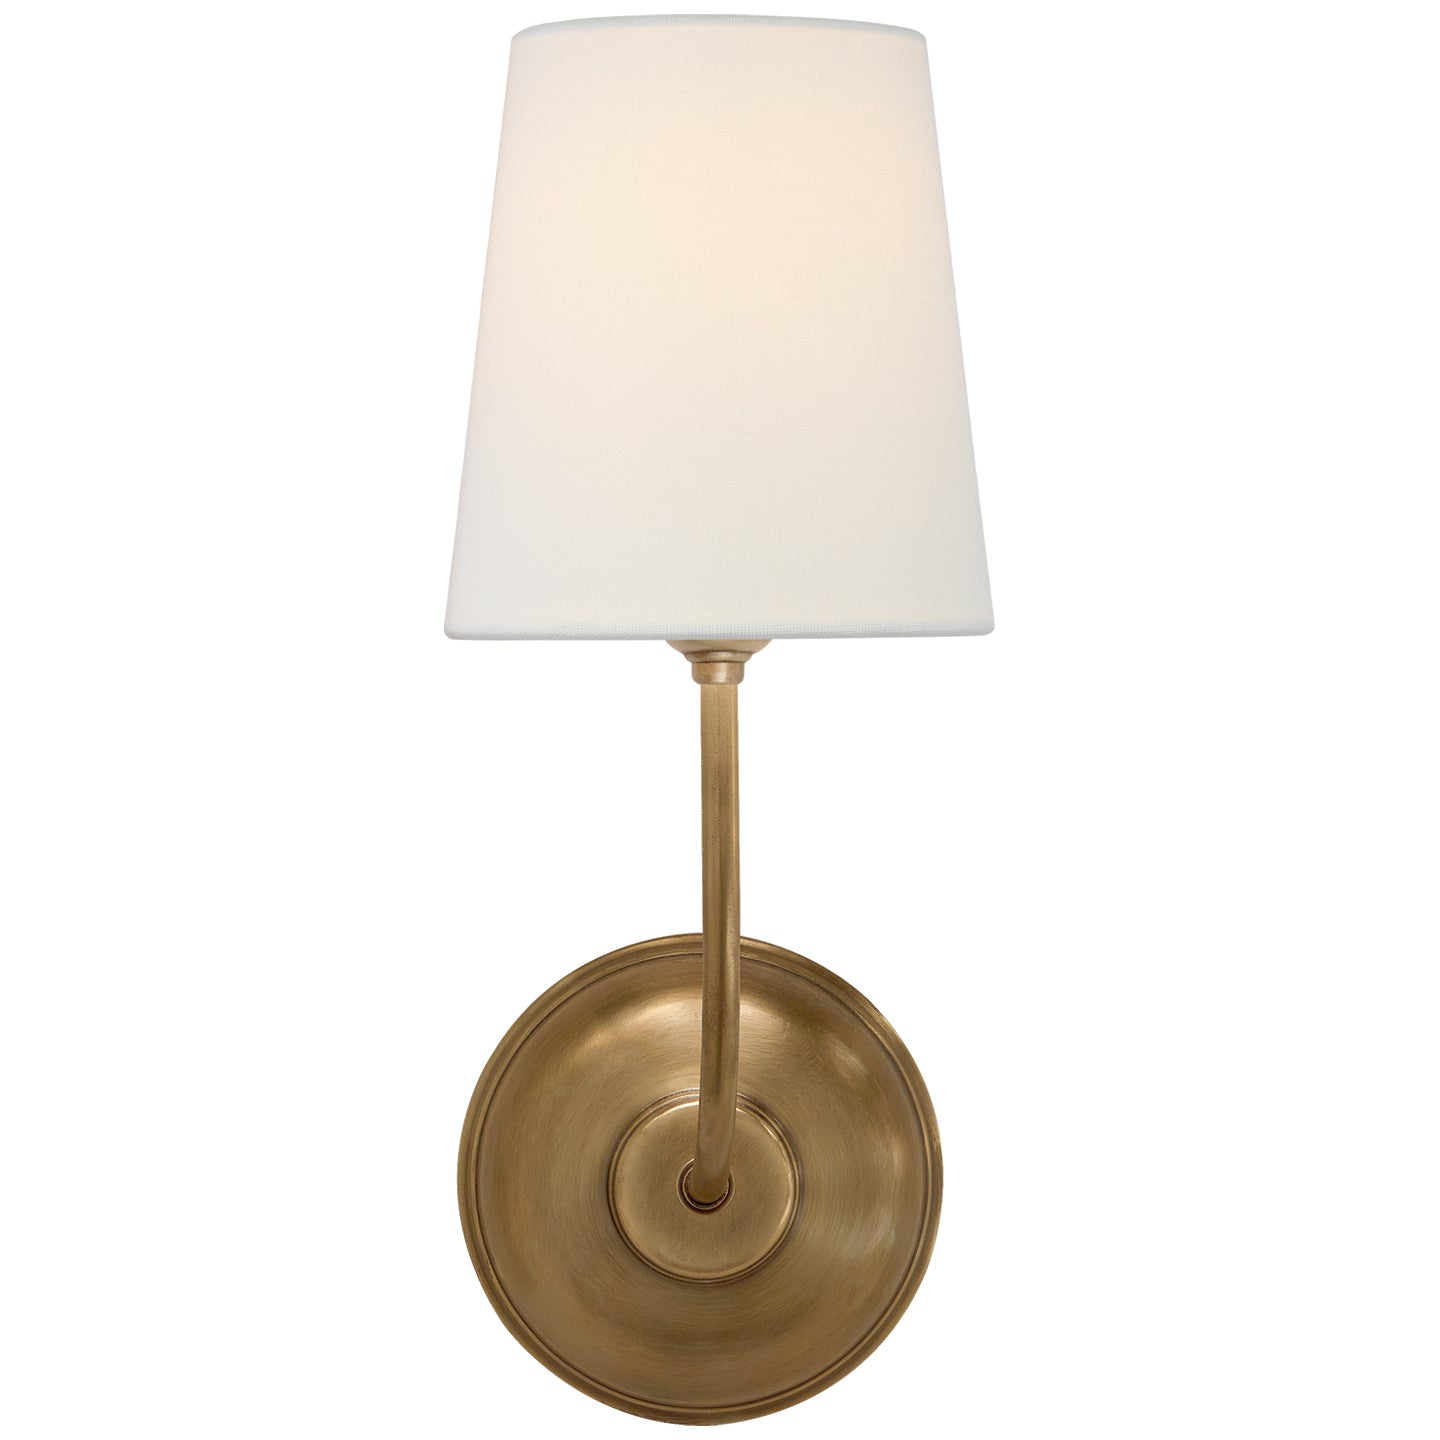 One Light Wall Sconce from the Vendome collection in Hand-Rubbed Antique Brass finish